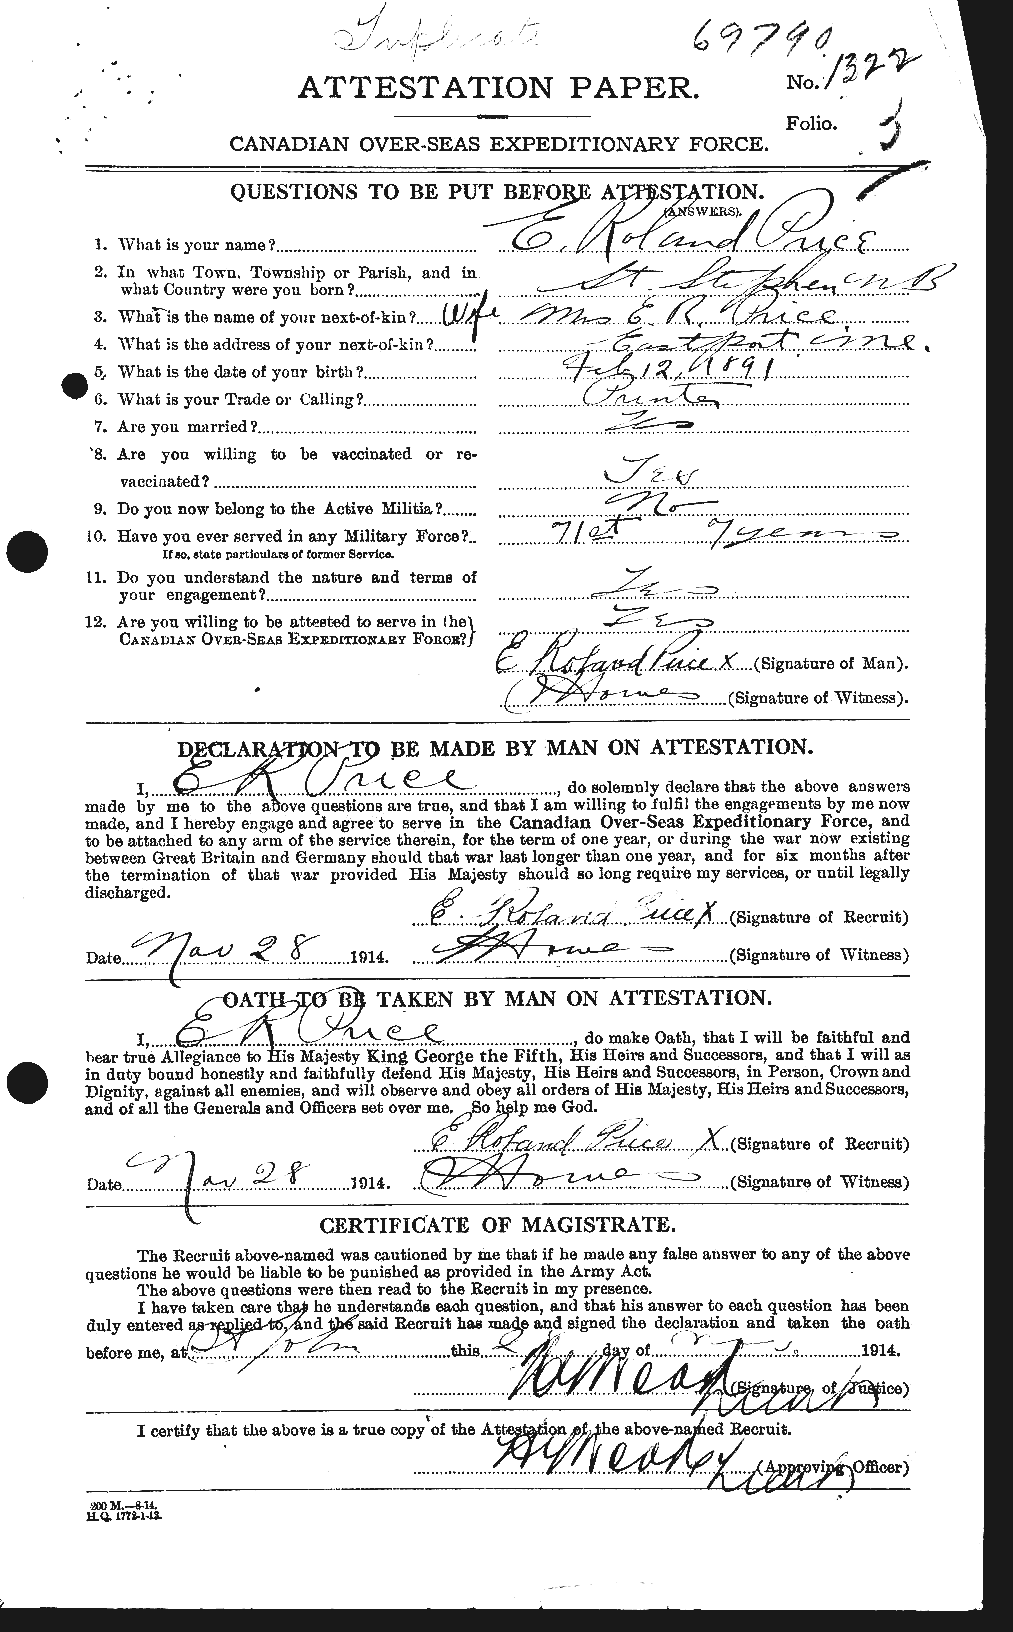 Personnel Records of the First World War - CEF 587014a